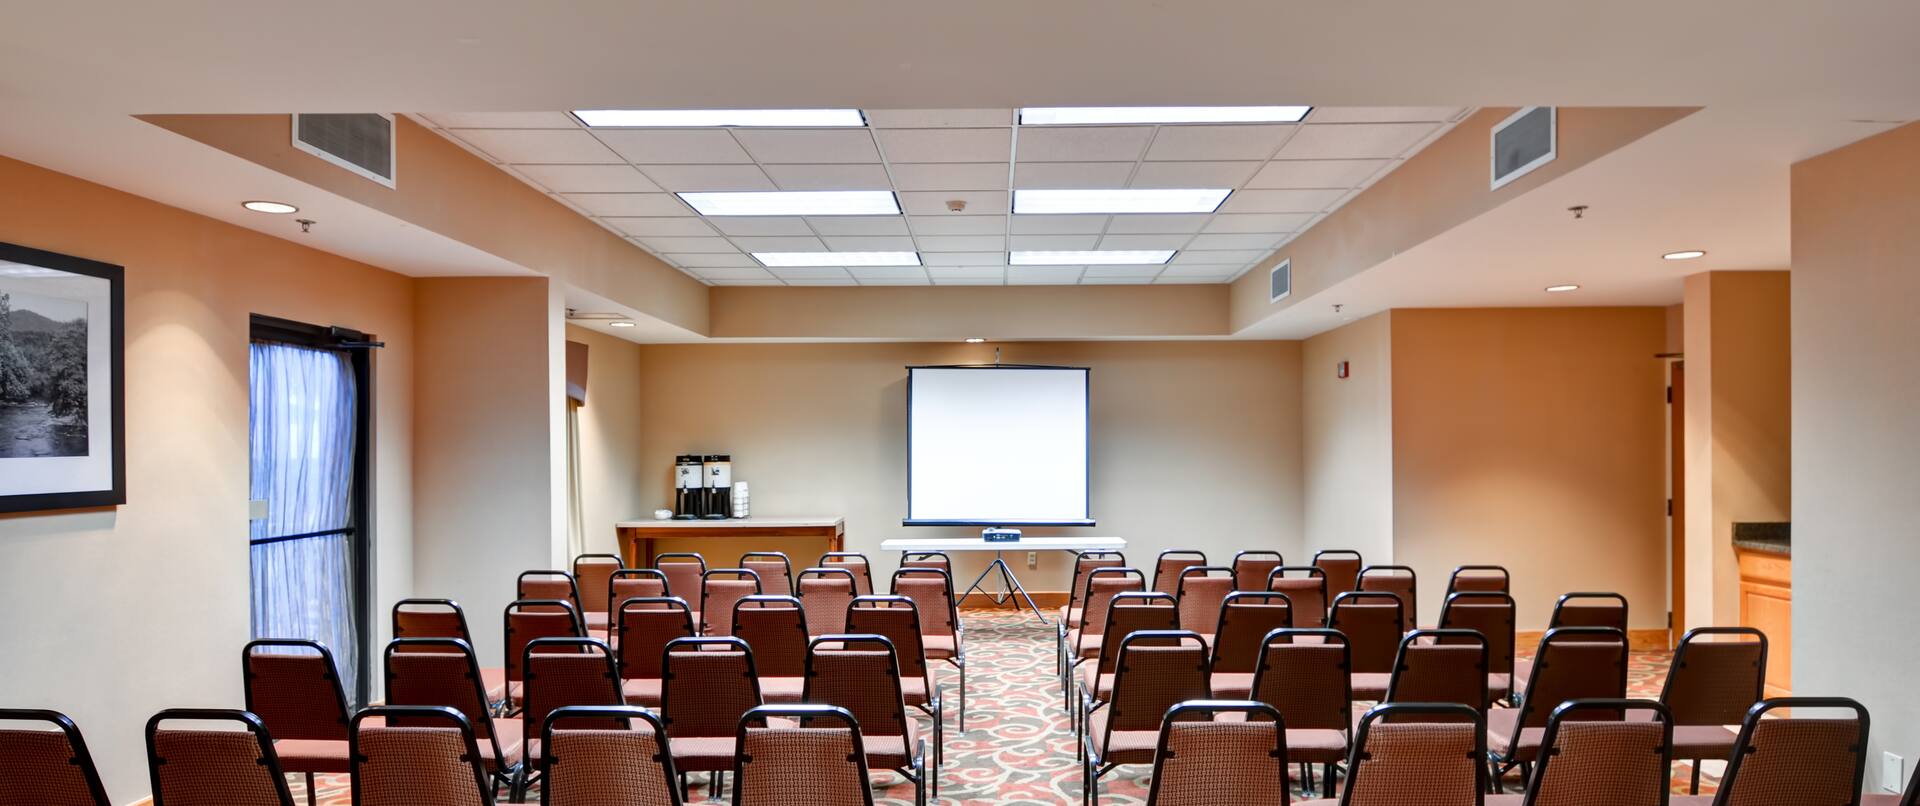 Meeting Room Conference Setup with Projector Screen